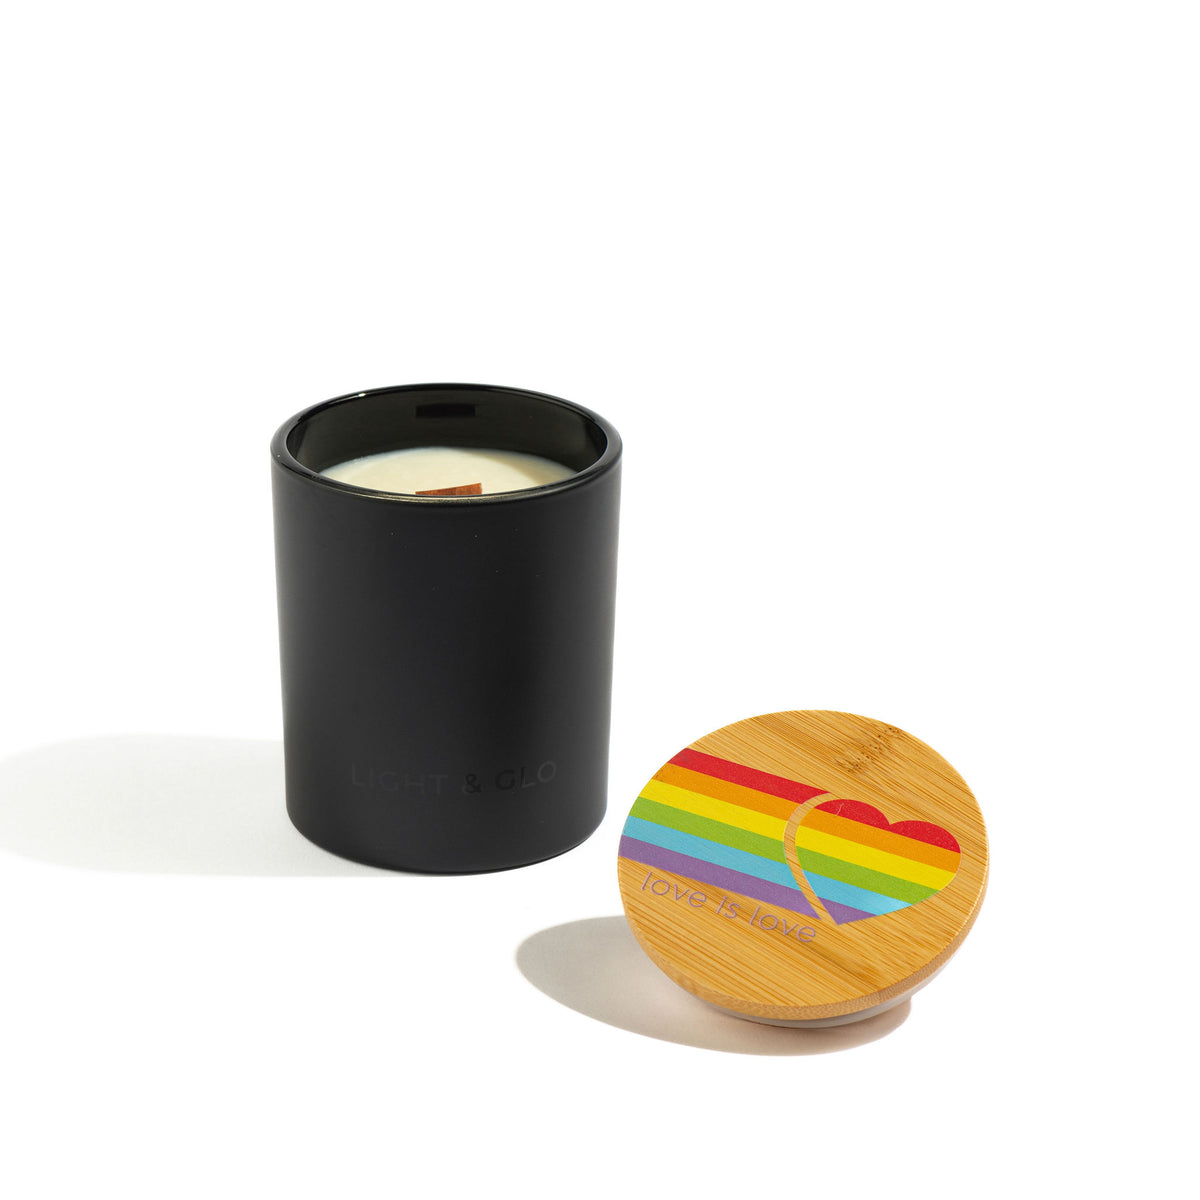 Pride Candle - Rainbow Spirit | Luxury Candles &amp; Home Fragrances by Light + Glo